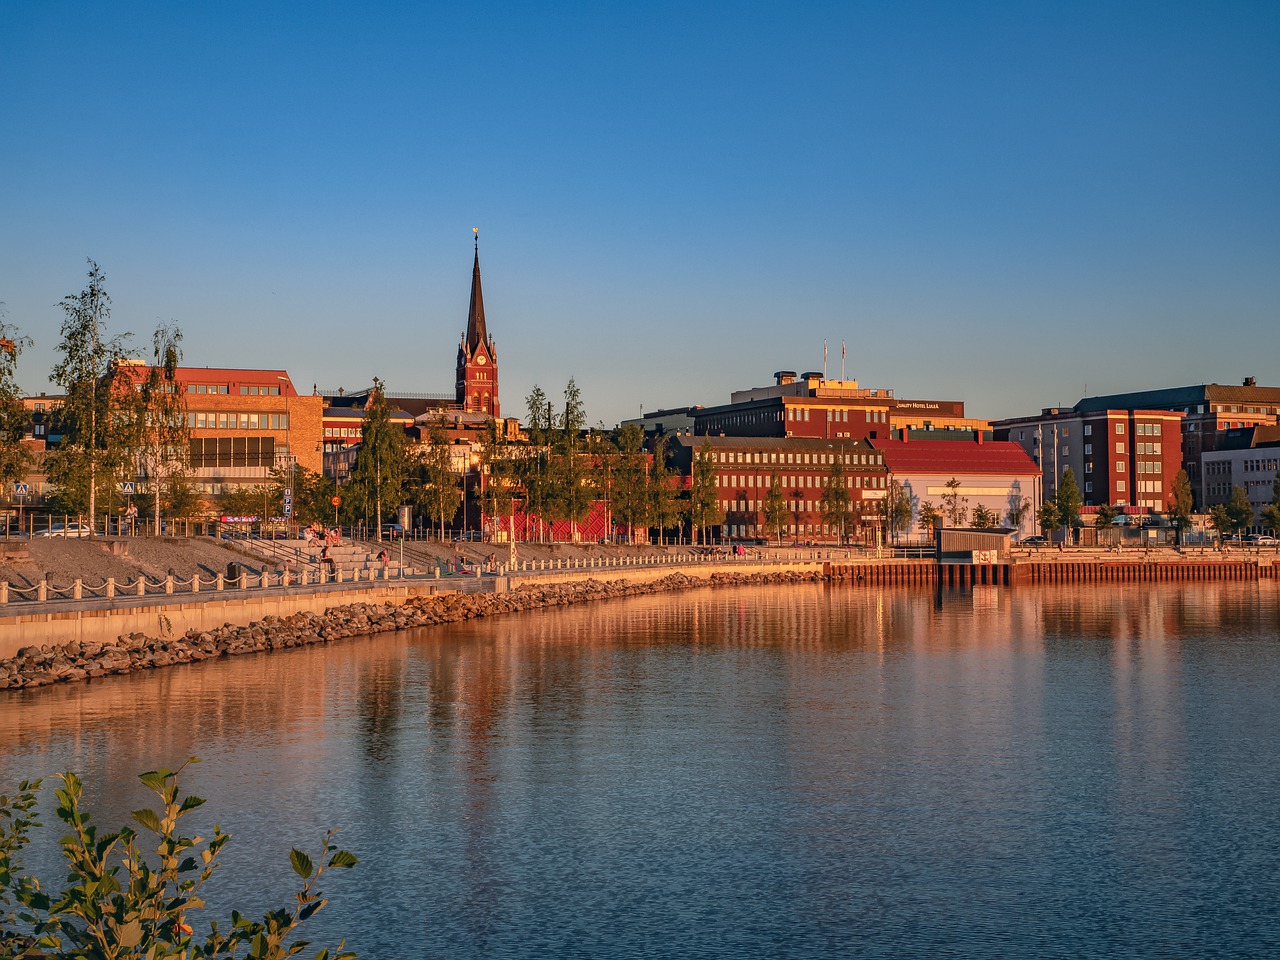 Beautiful view of the Lulea city in Sweden during a lovely golden hour